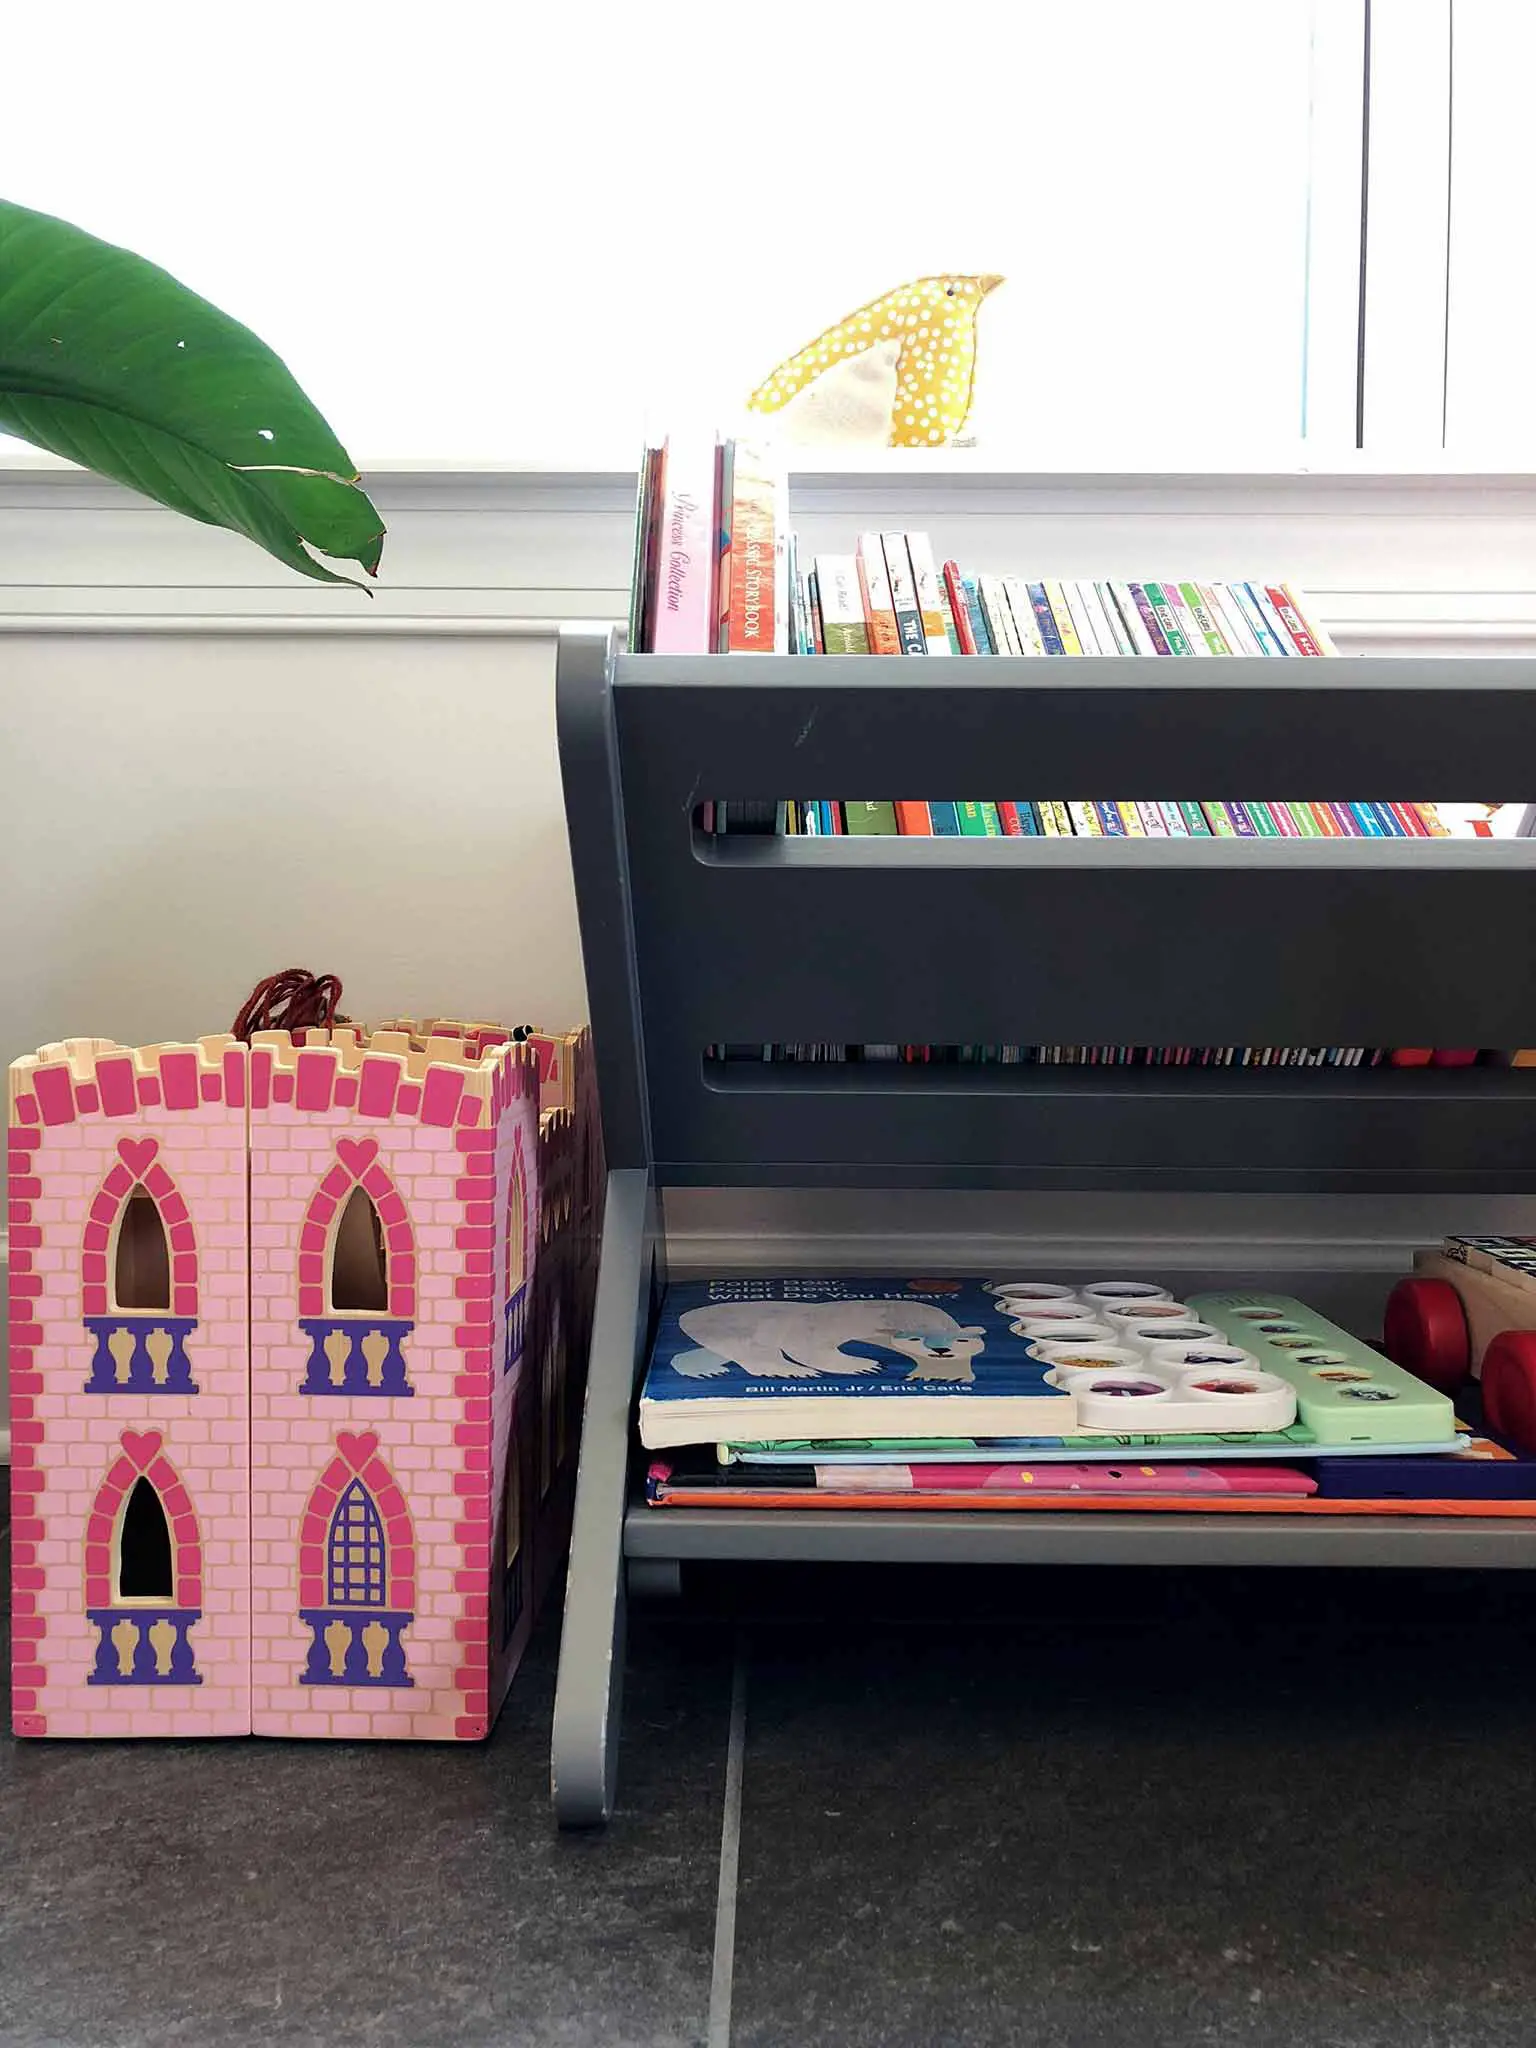 Book caddy - How to Declutter, Organize and Style Kids' Books - That Homebird Life Blog